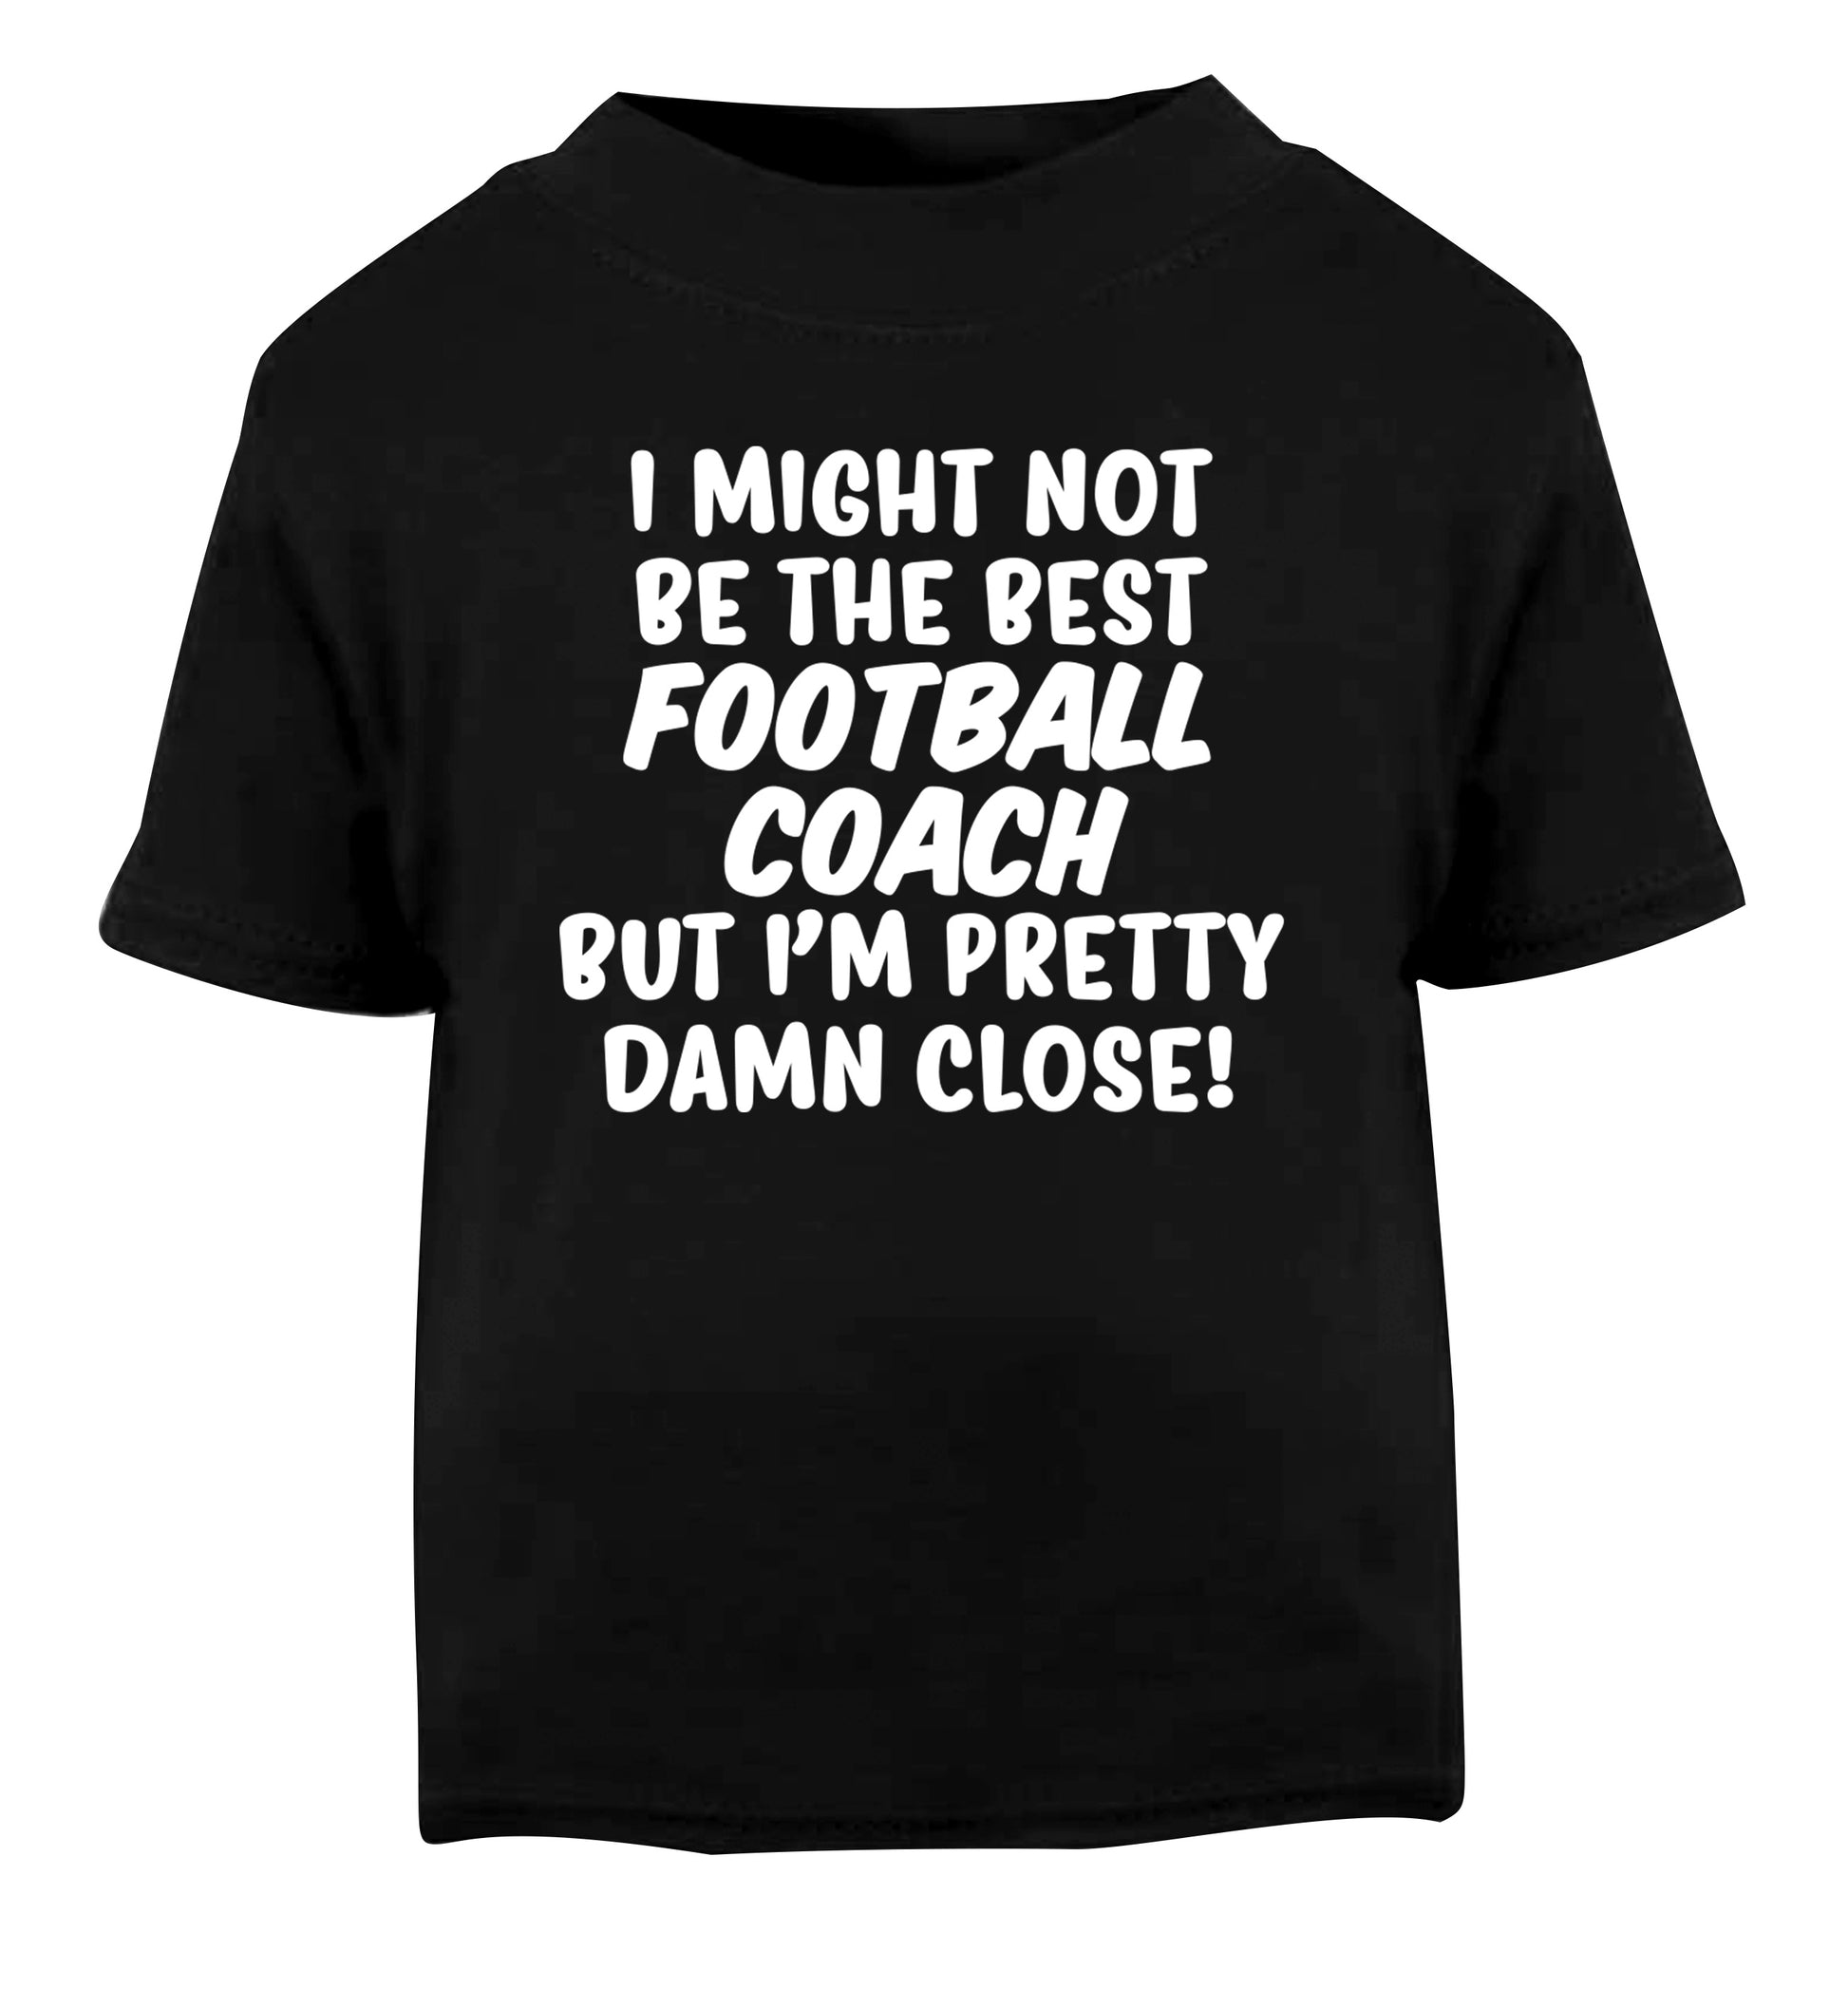 I might not be the best football coach but I'm pretty close! Black Baby Toddler Tshirt 2 years